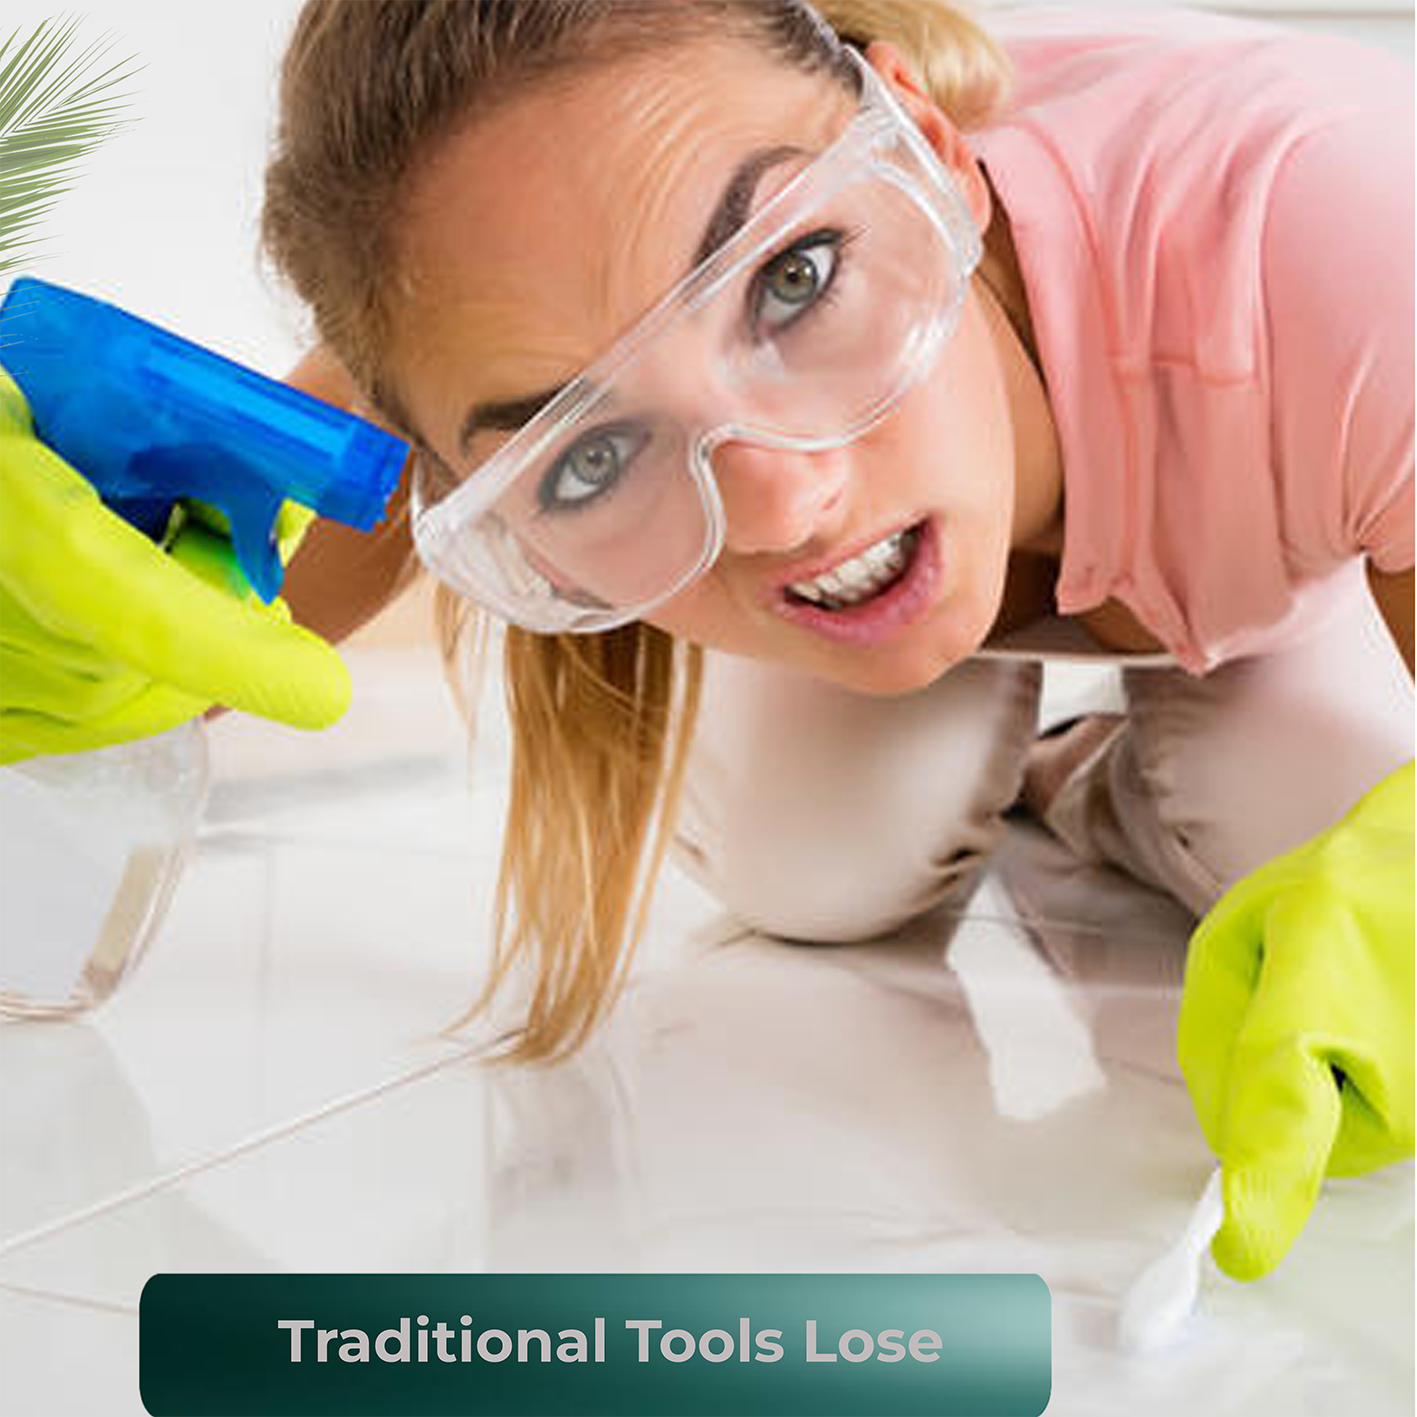 "Woman using advanced cleaning spray and gloves to clean floor tiles, demonstrating efficiency over traditional cleaning tools"